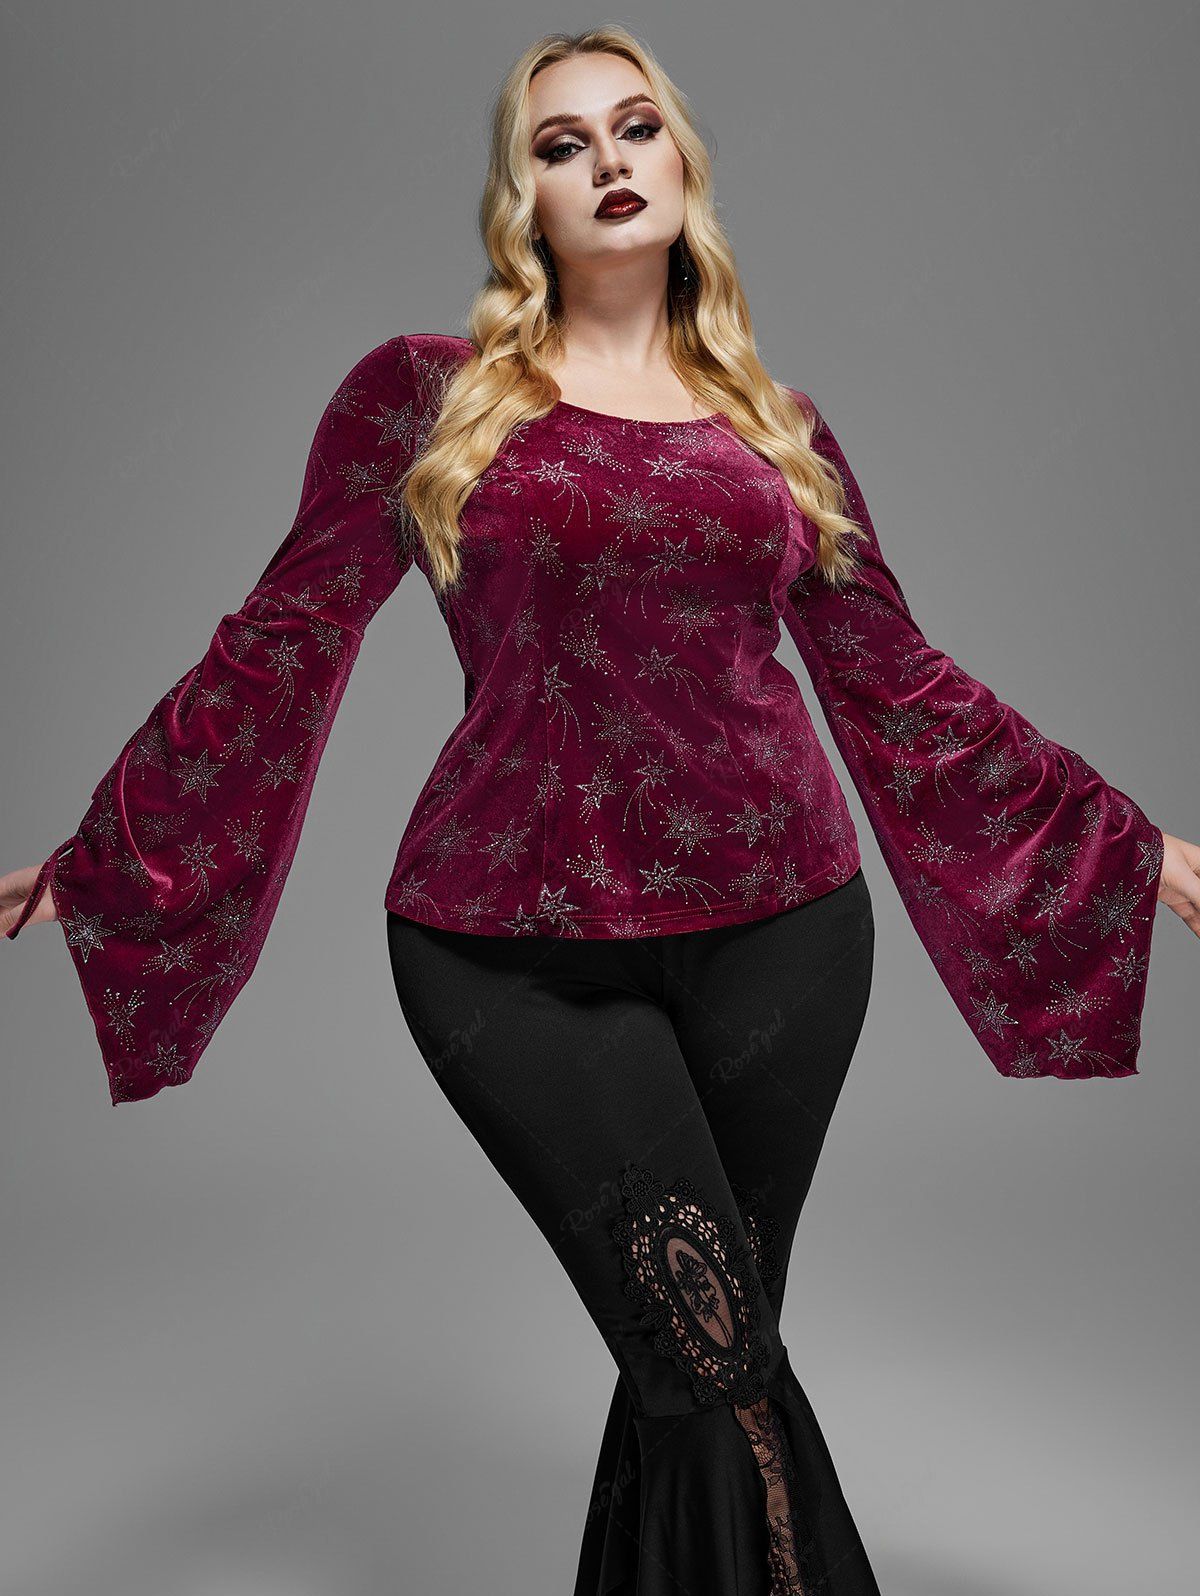 Gothic Glitter Star Print Cinched Flare Sleeves Velvet Top